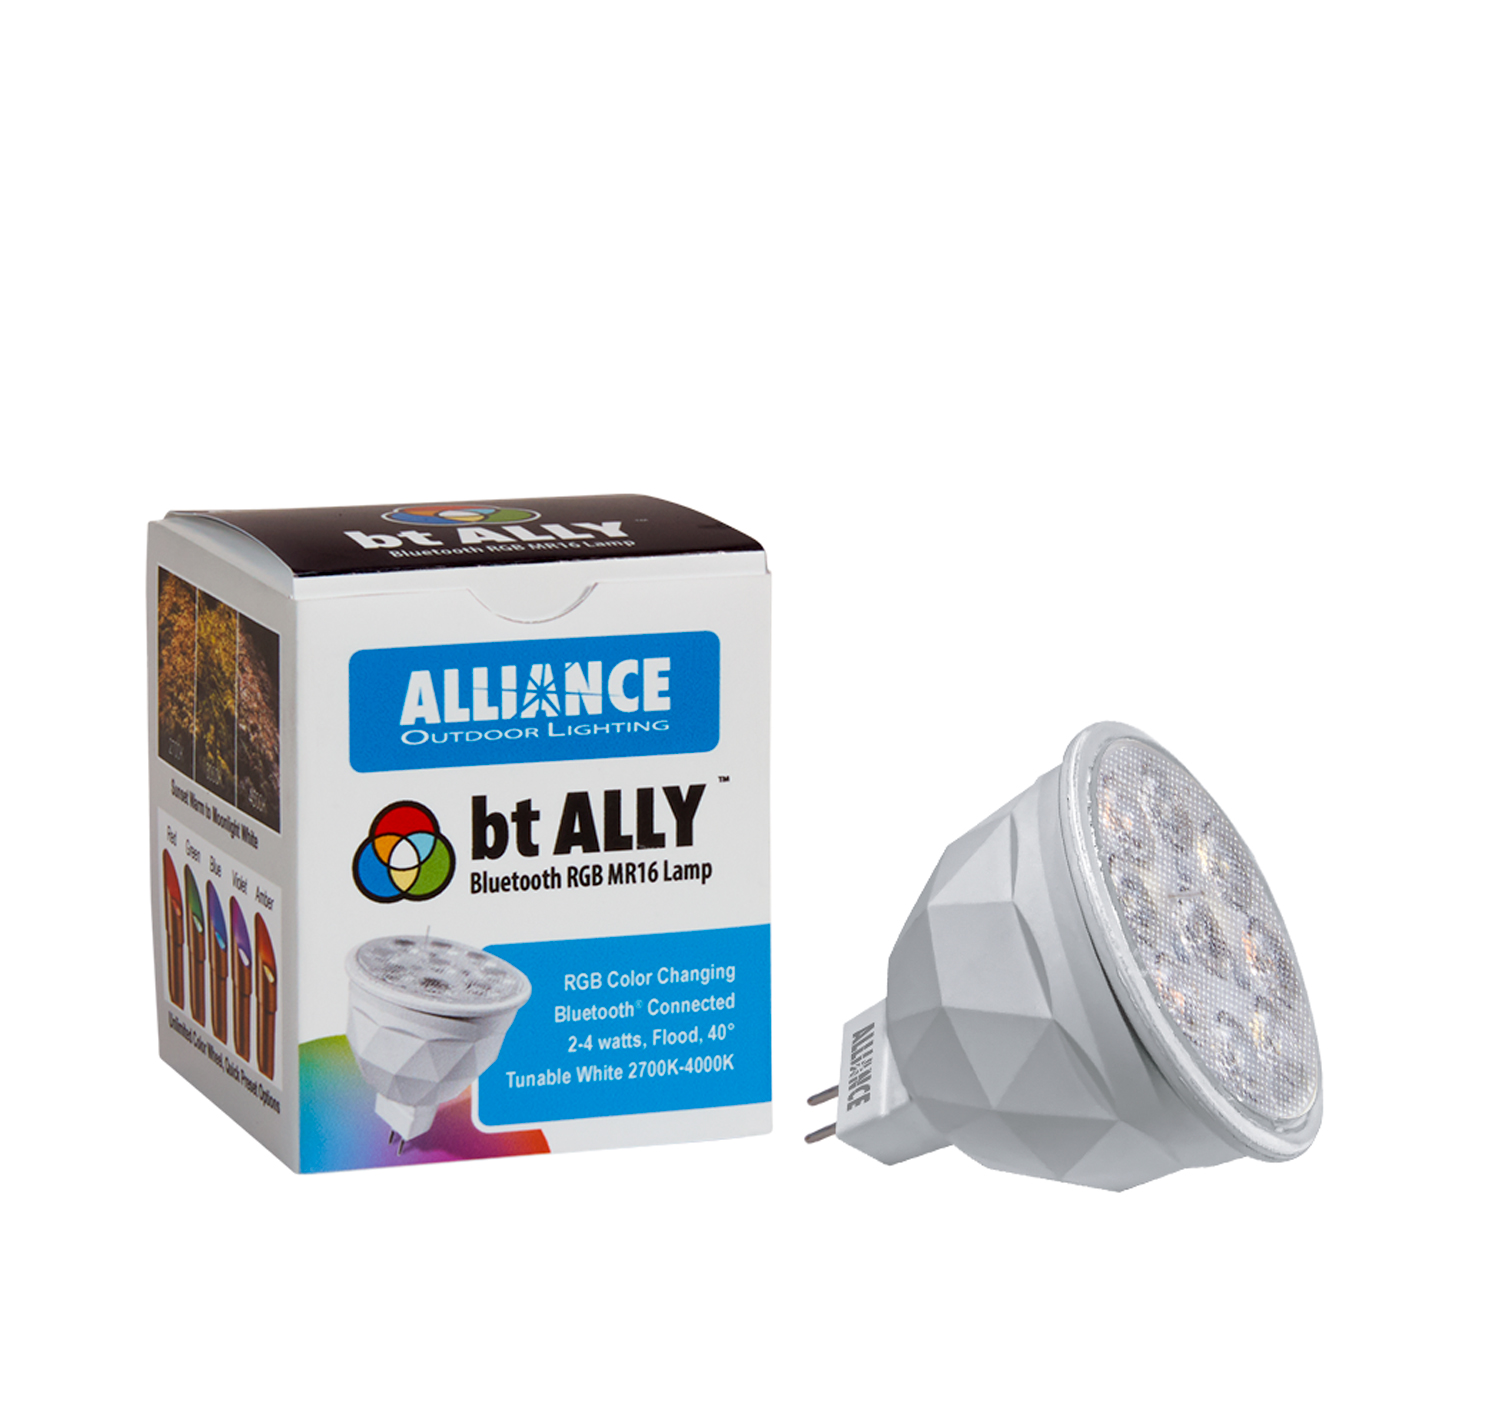 Featured image for “BT ALLY App-Controlled RGBW Lamps”